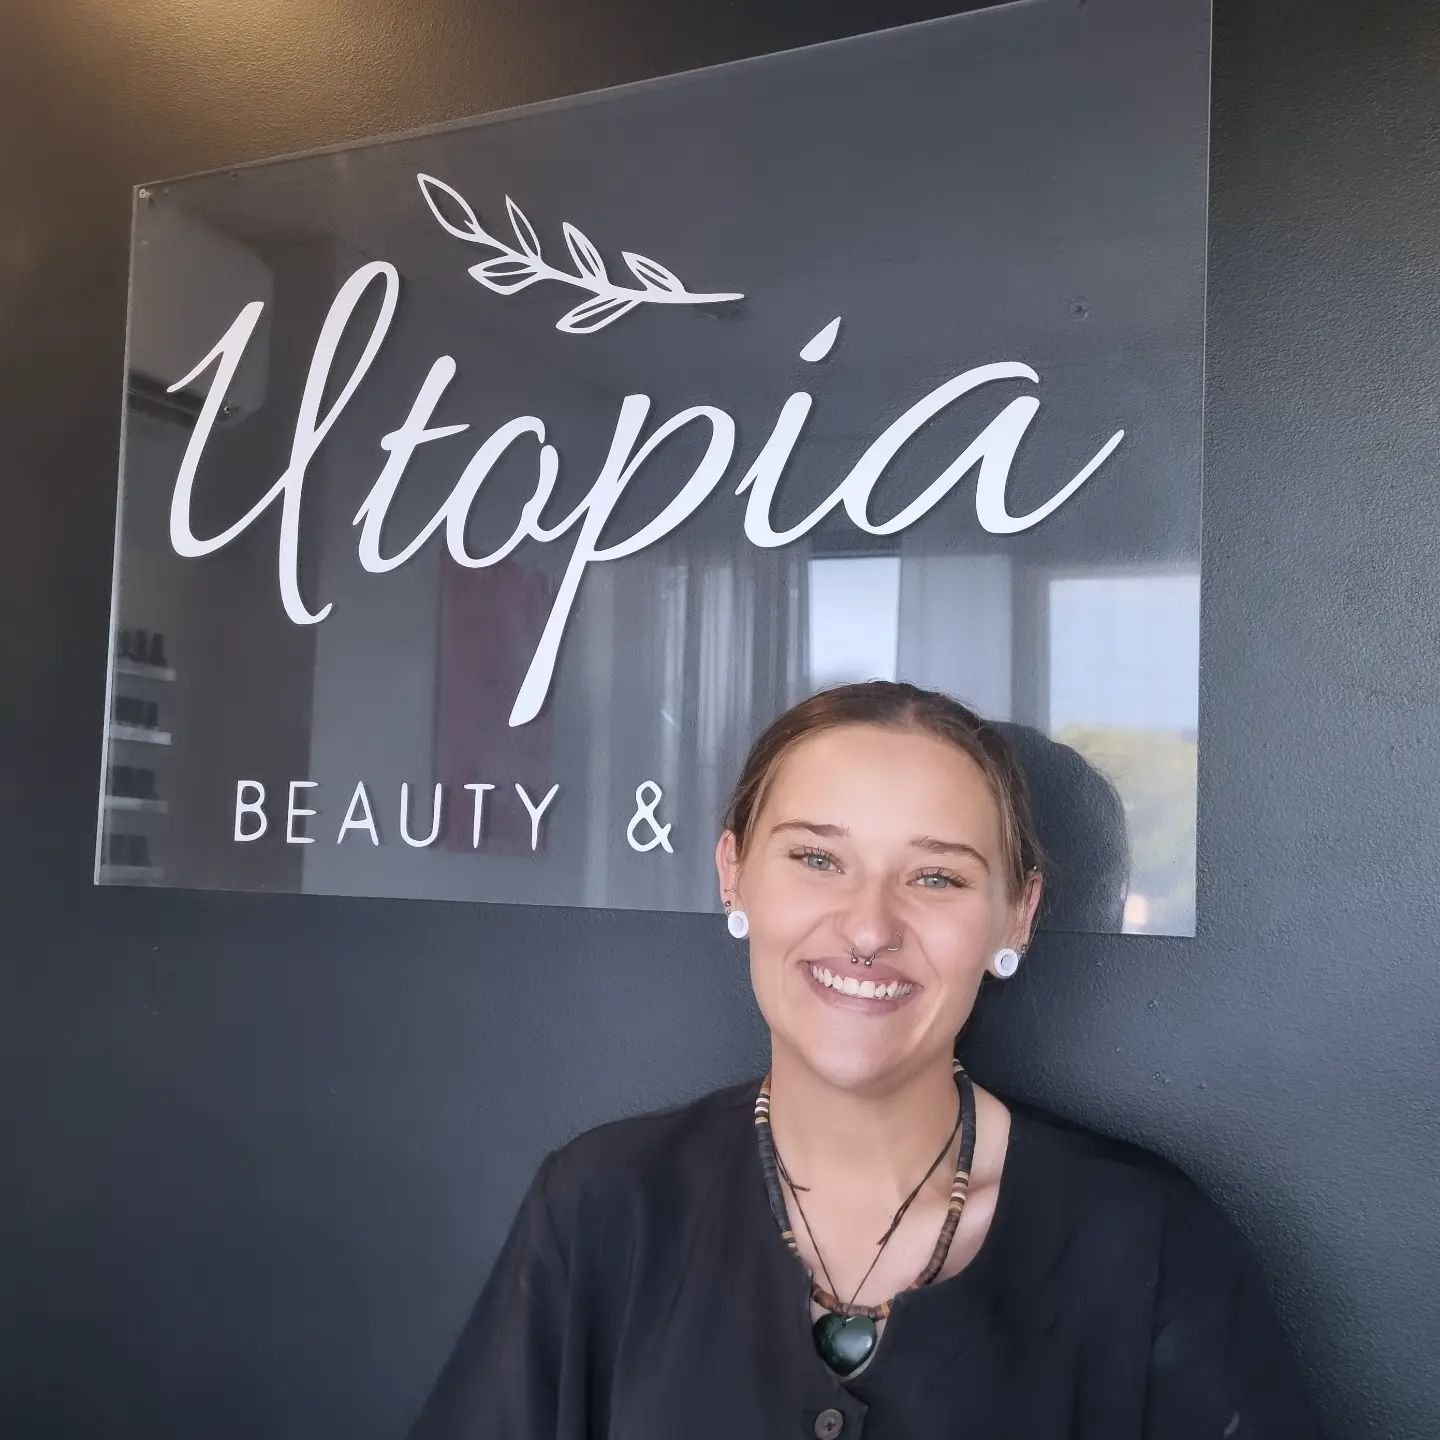 So excited to announce Cheyenne will be joining me in the salon Mondays, Tuesdays and Wednesdays. 

She is a fully qualified Beauty Therapist and has available appointments for massage, all types of facials and waxing. 

Be sure to pop in and say hi!